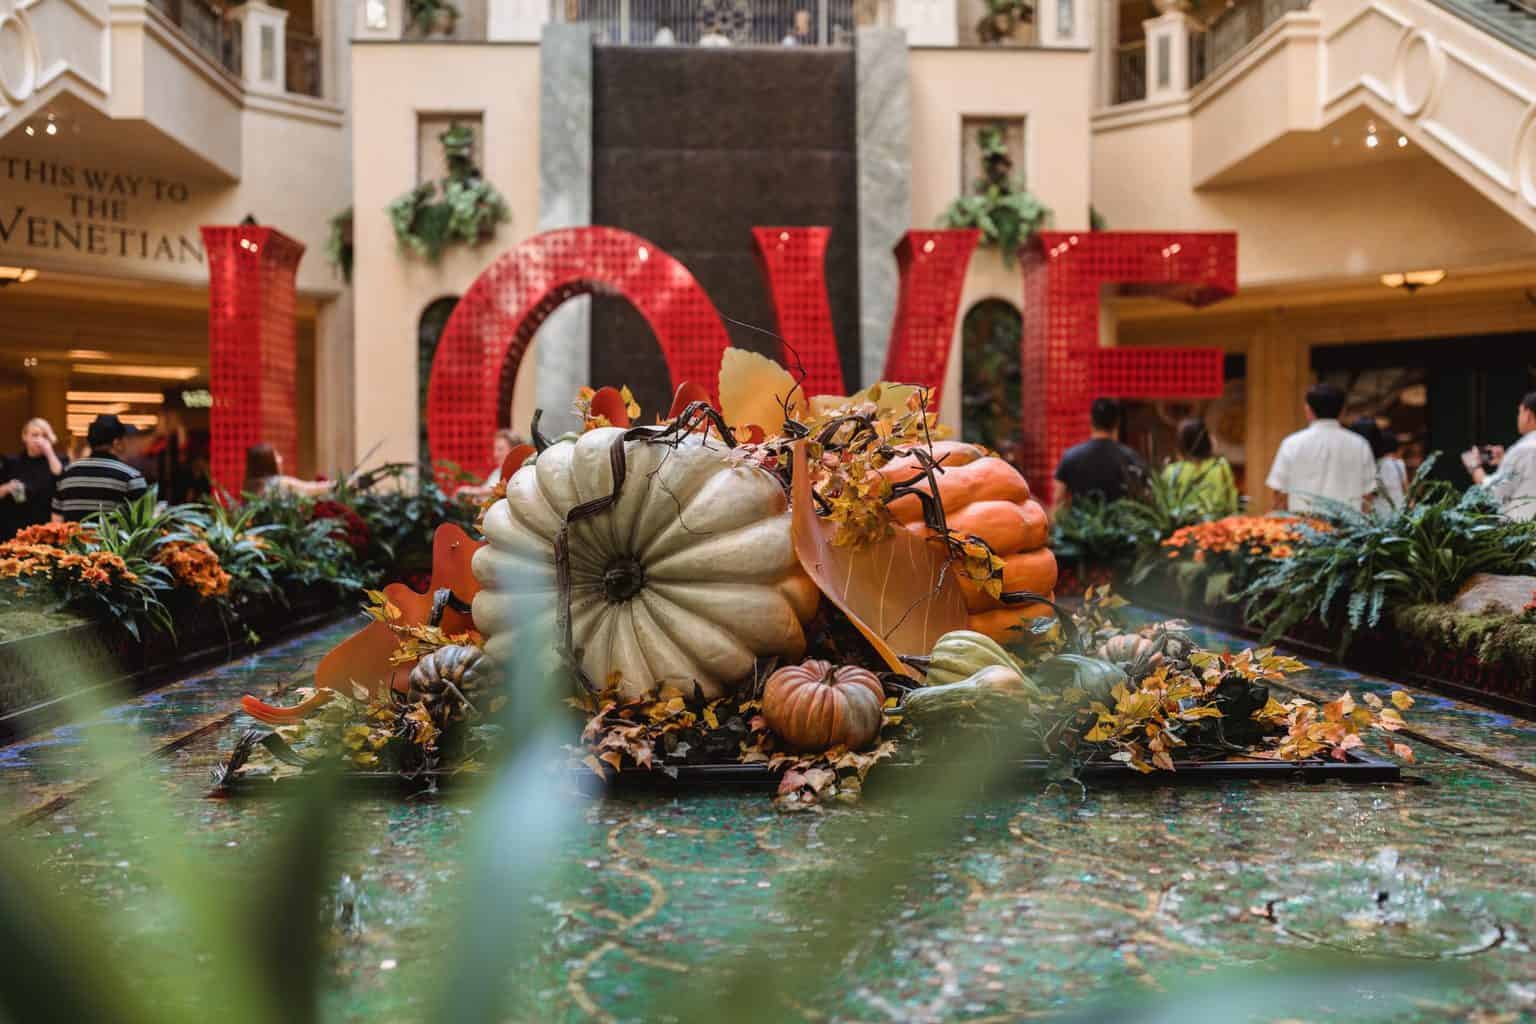 Gigantic pumpkins creatively displayed as ornament 